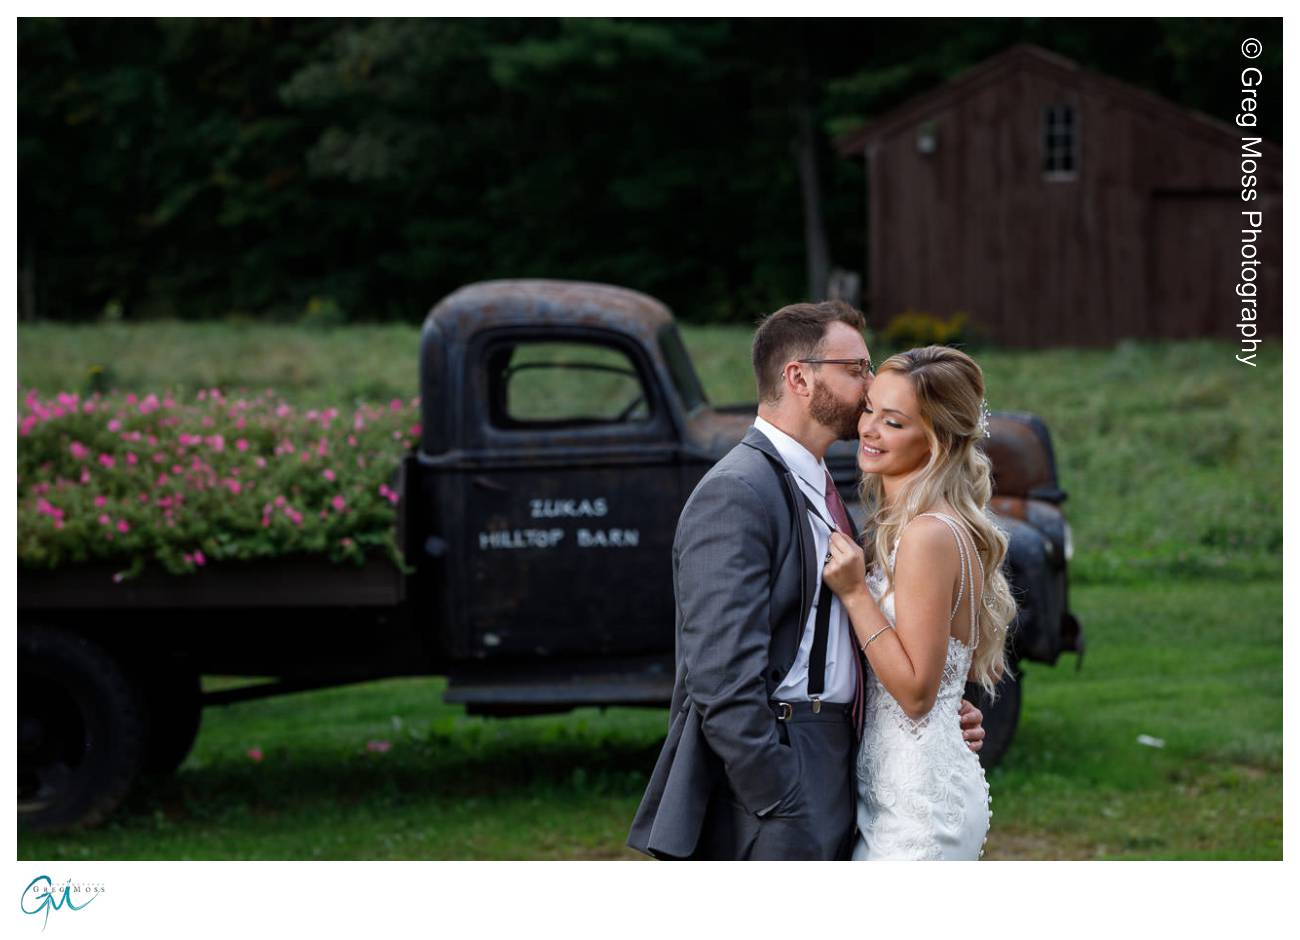 Zukas HIlltop Barn Truck with flowers and Groom Kissing bride in front